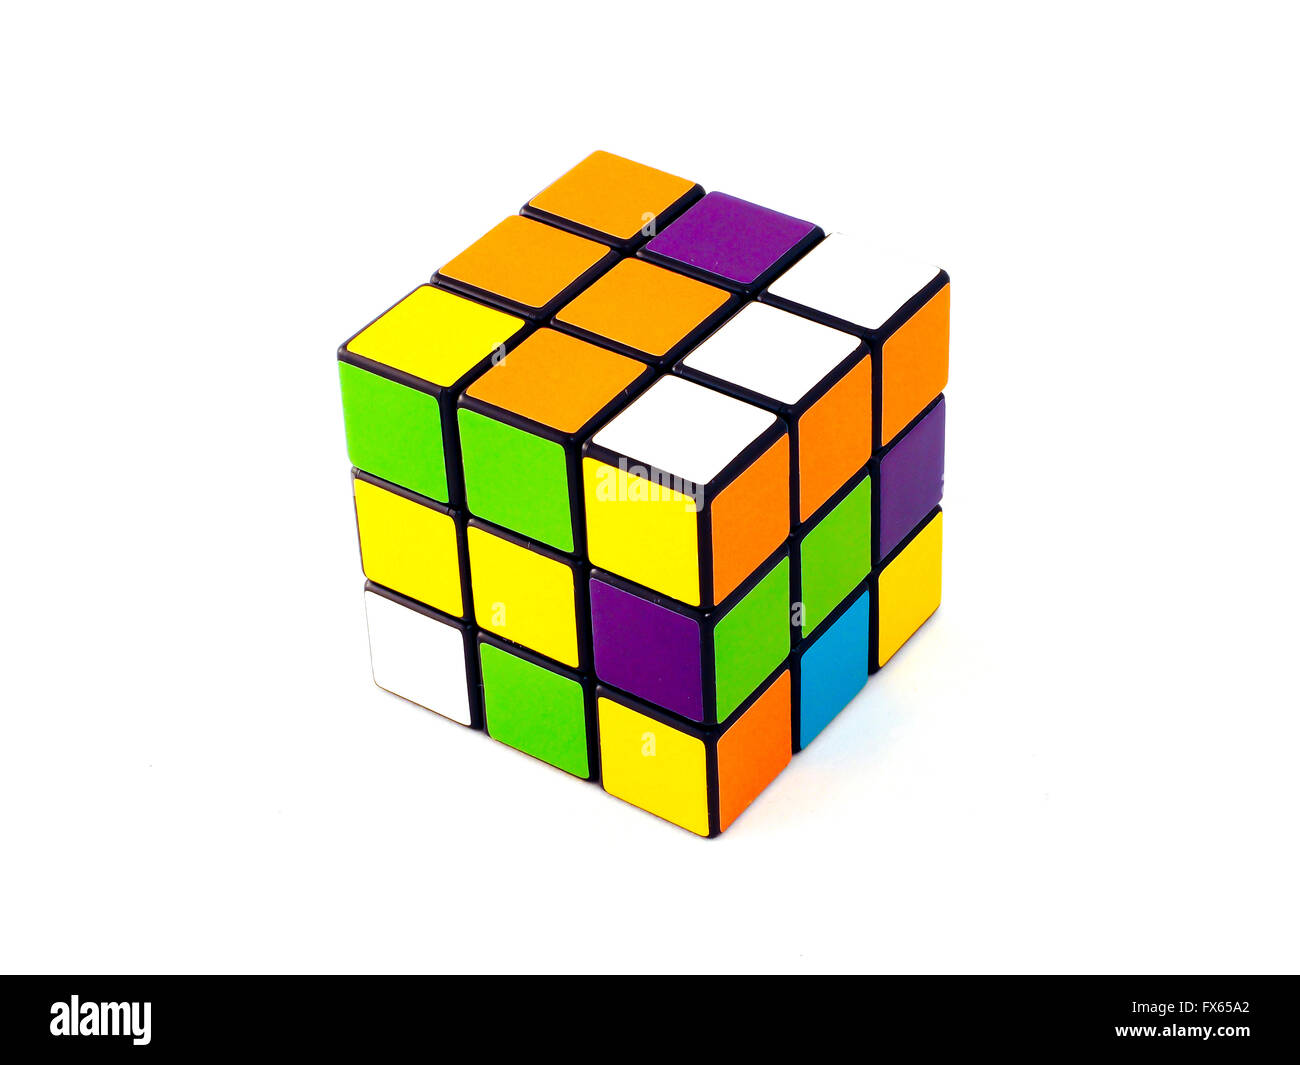 Rubik's cube with unusual colors on white background. It was invented by Hungarian architect Erno Rubik. Stock Photo